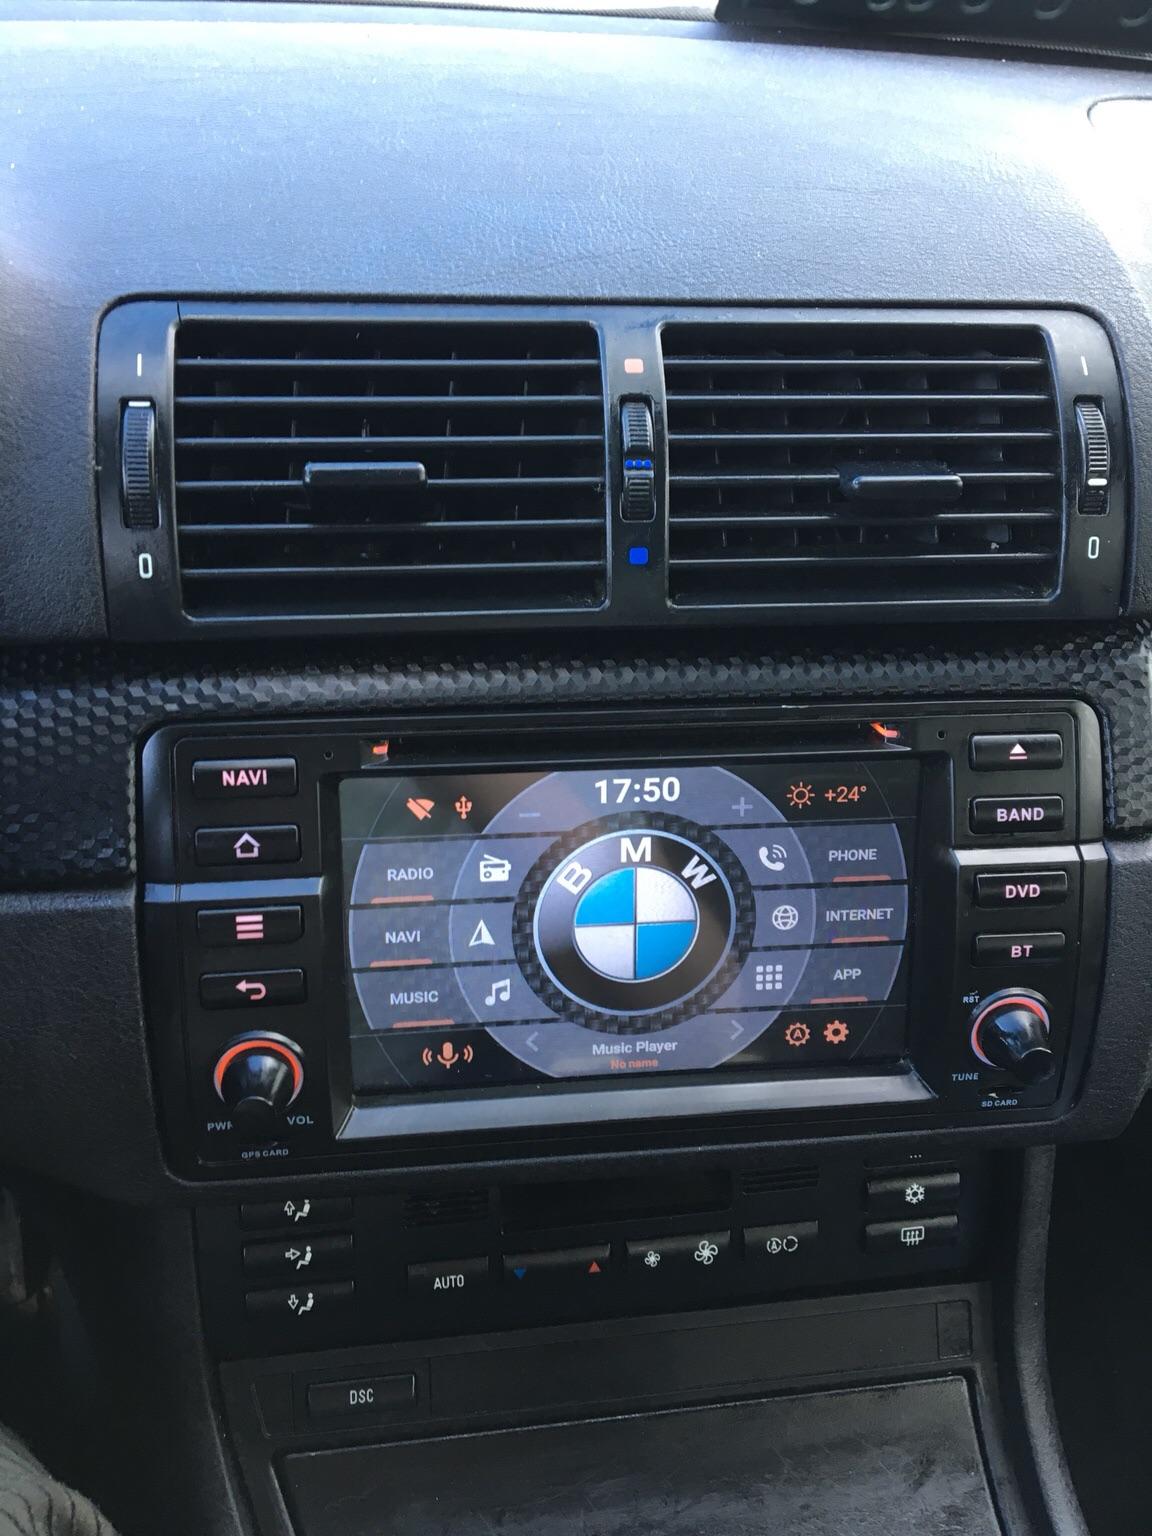 BMW E46 Android Radio in 5261 HelpfauUttendorf for €250